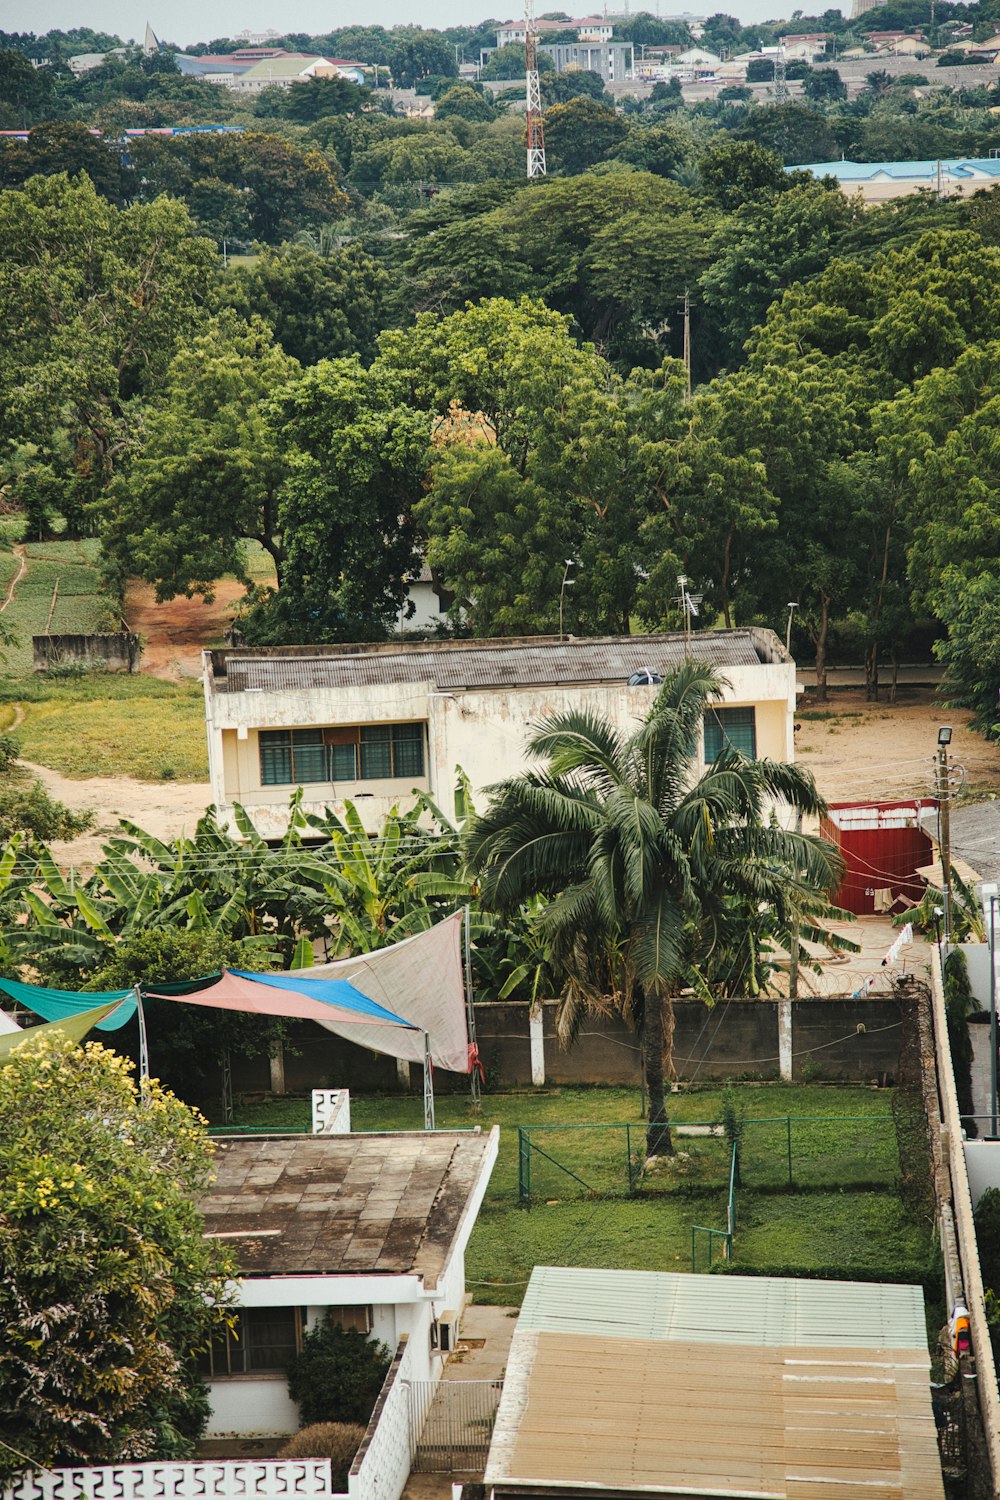 a view of some houses and trees from a hill